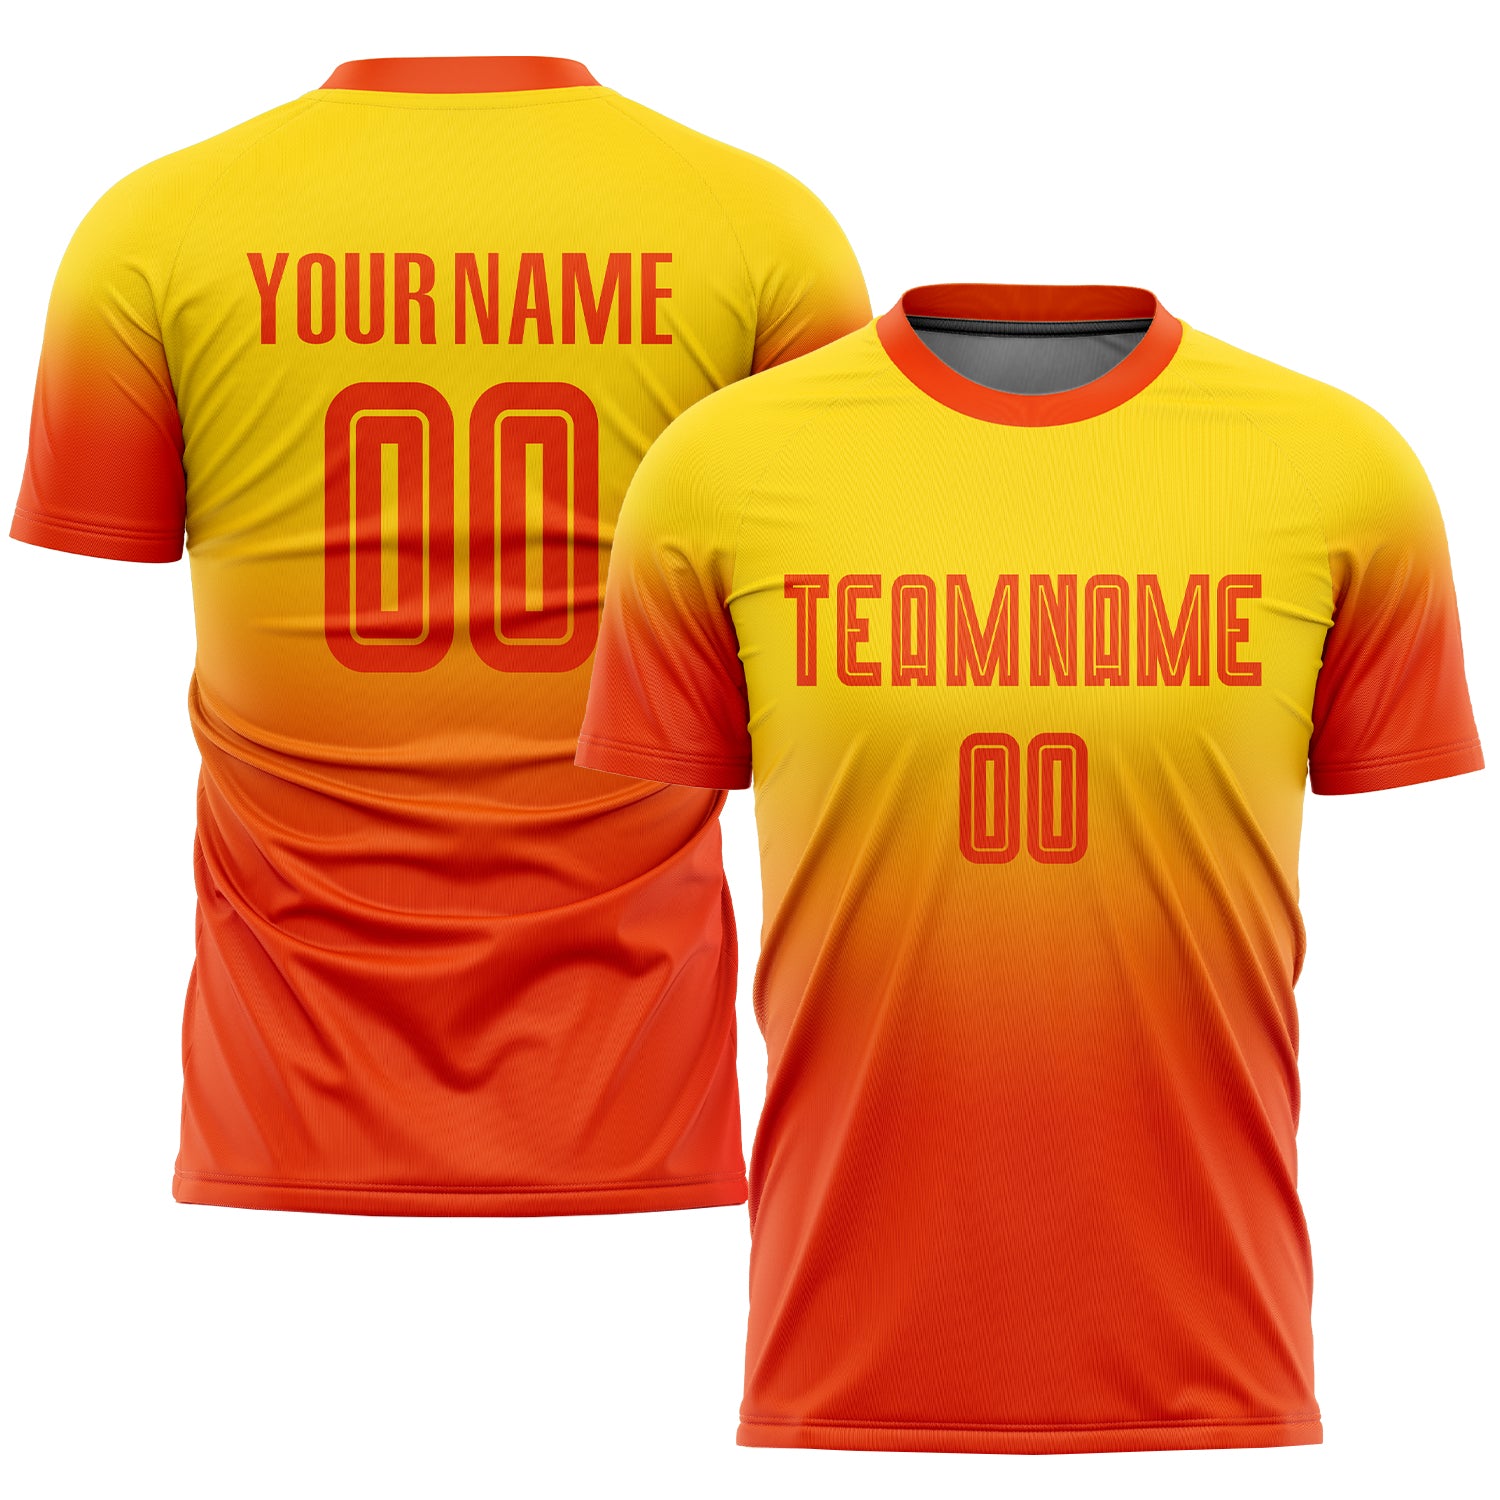 Slope Style Football Shirt Design With Rednavy Colors Sublimation